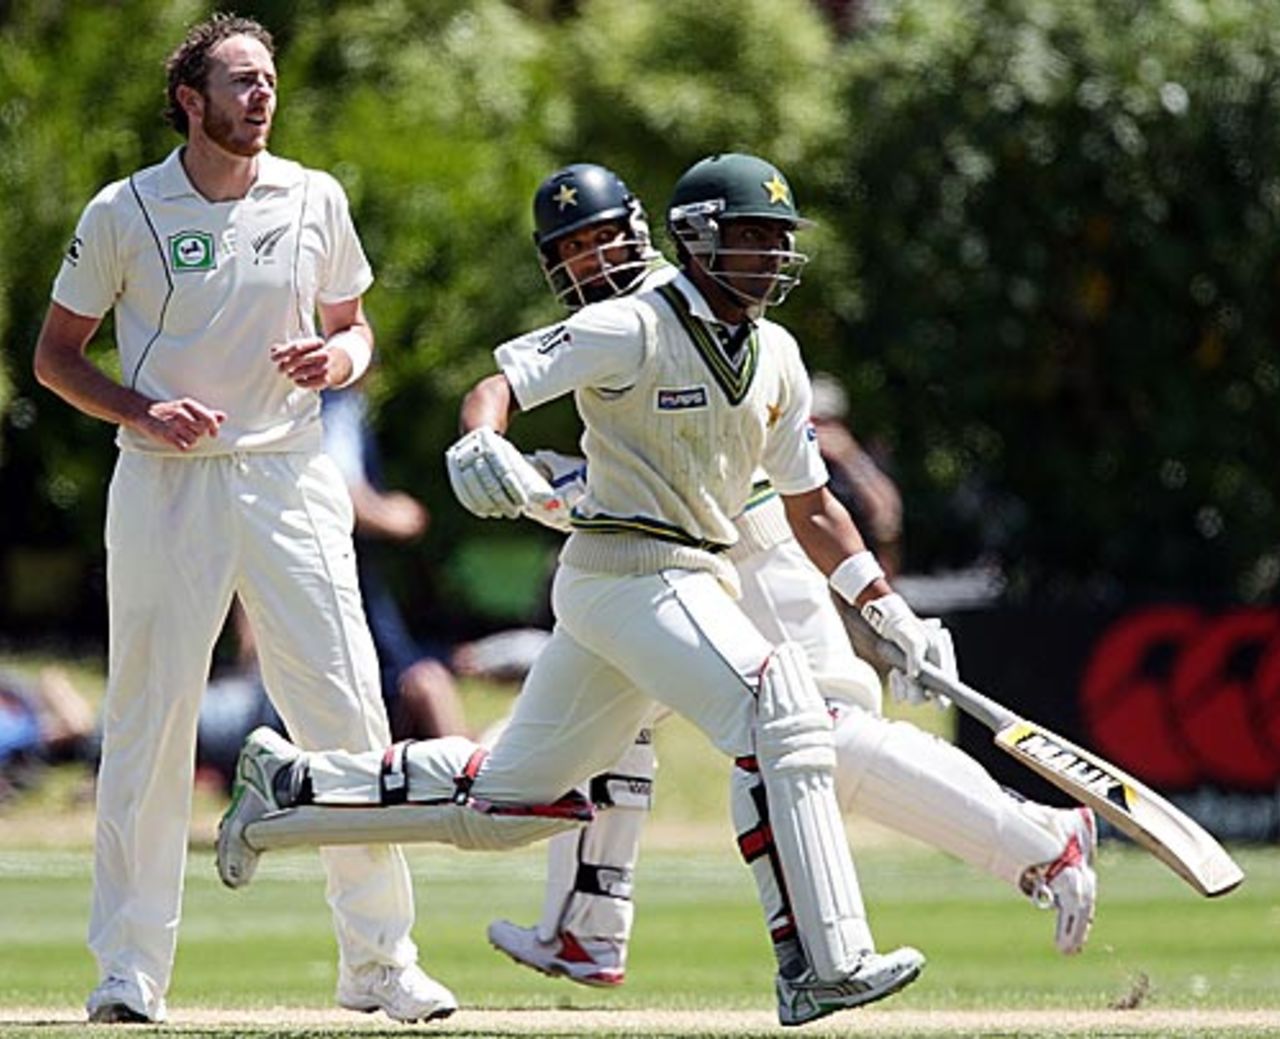 Umar Akmal and Mohammad Yousuf pinch another run as Iain O'Brien looks on, New Zealand v Pakistan, 1st Test, Dunedin, 5th day, November 28, 2009